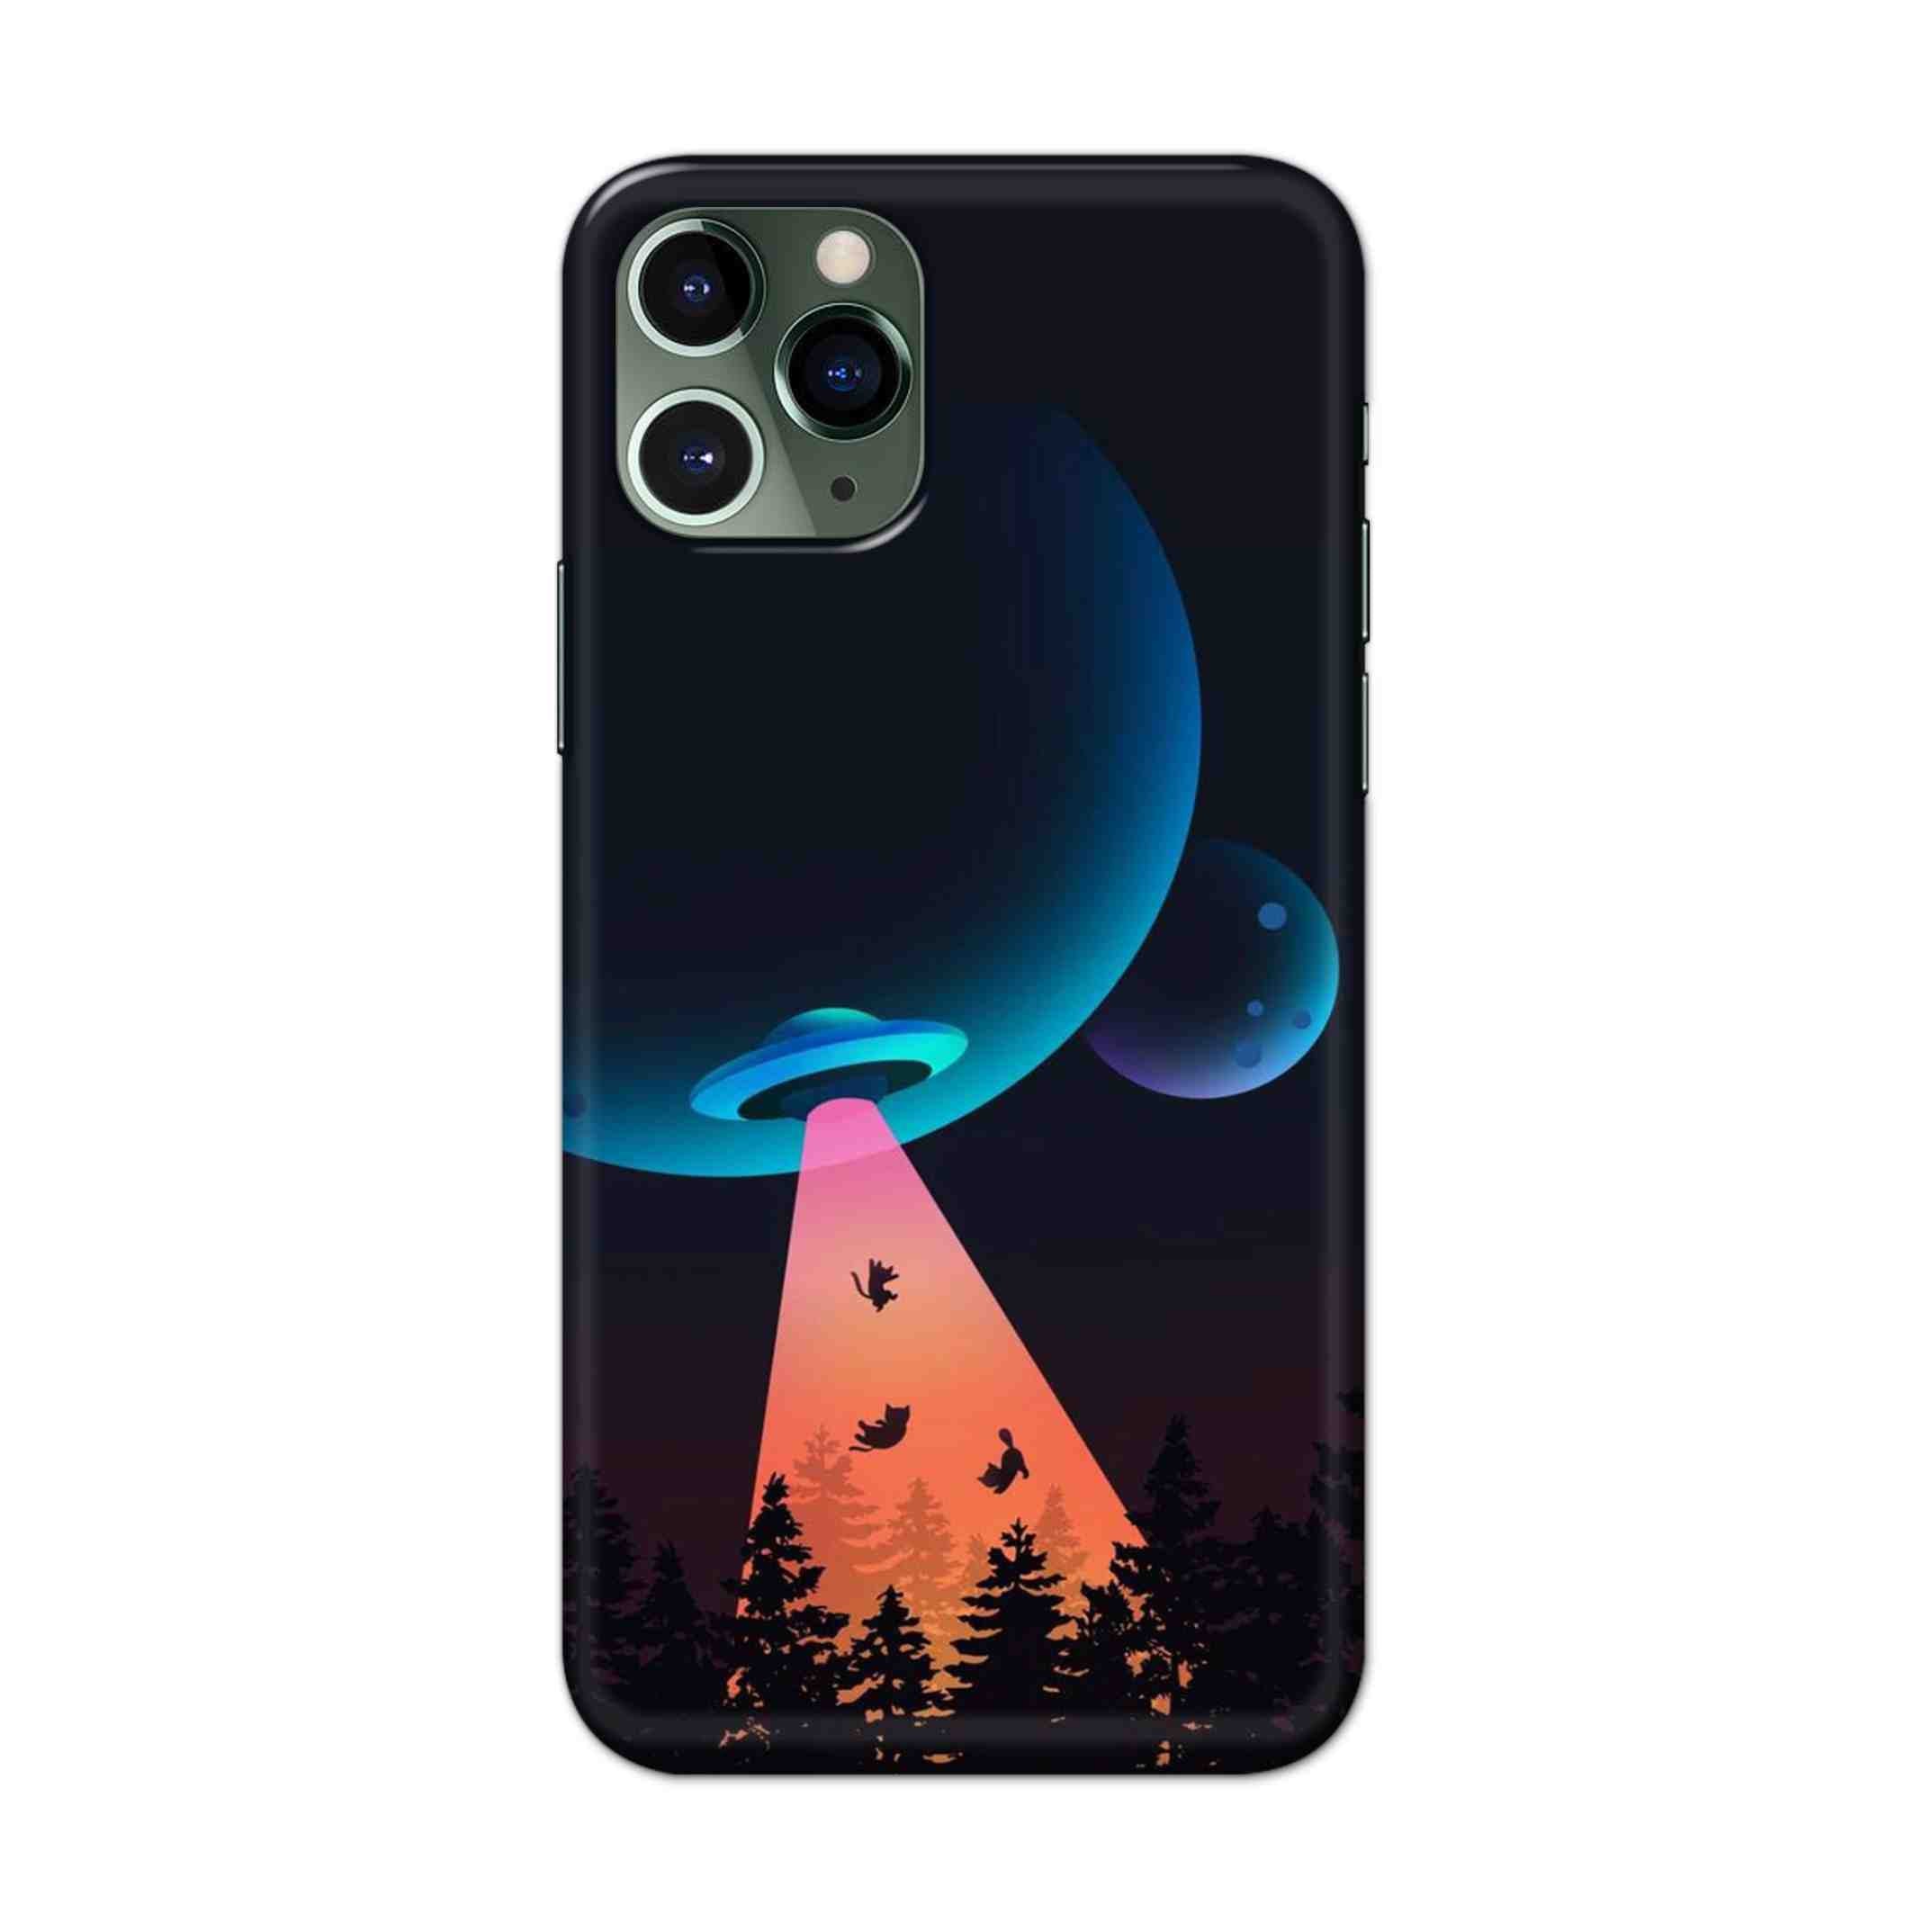 Buy Spaceship Hard Back Mobile Phone Case/Cover For iPhone 11 Pro Online